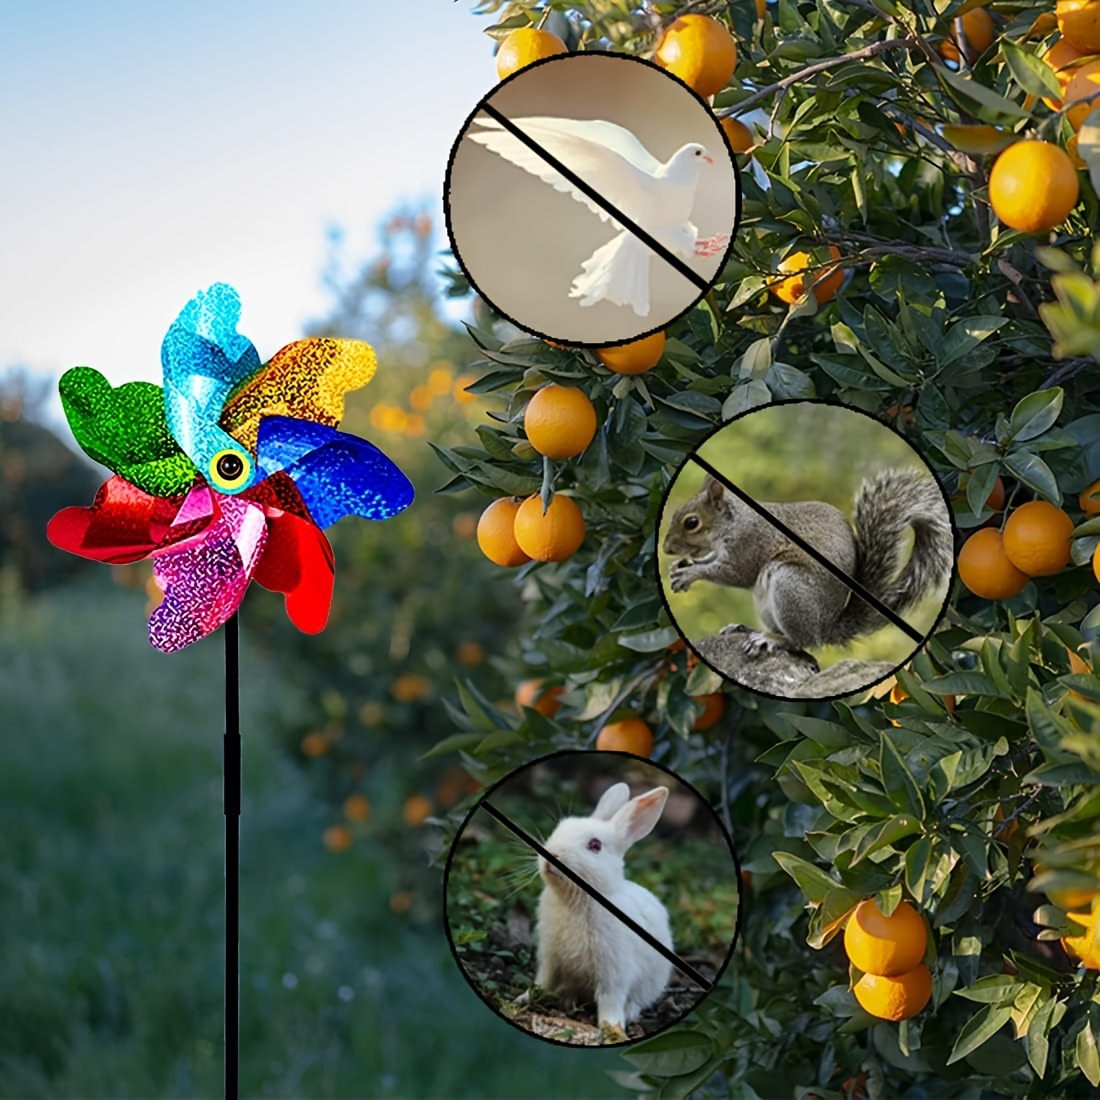 

bird-proof" 6-piece Sparkly Rainbow Pinwheels With Stakes - Reflective Wind Spinners For Garden & Yard Decor, Bird Repellent Devices To Scare Away Birds From Patio & Farm